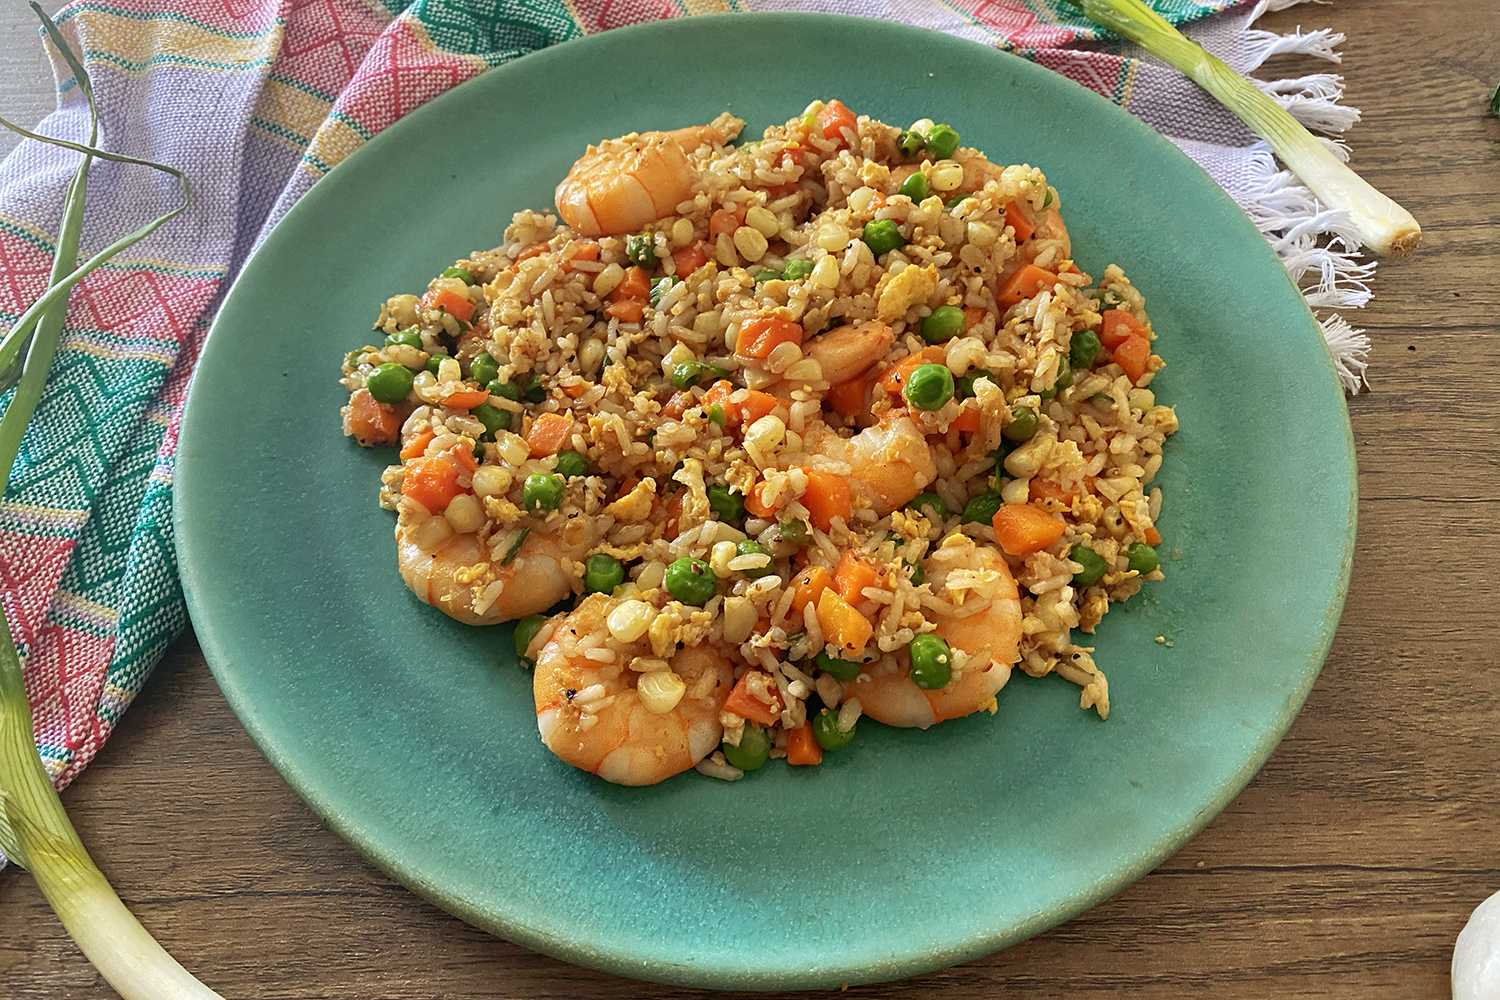 fried rice mixed with shrimp, peas and carrot cubes in a blue plate top view